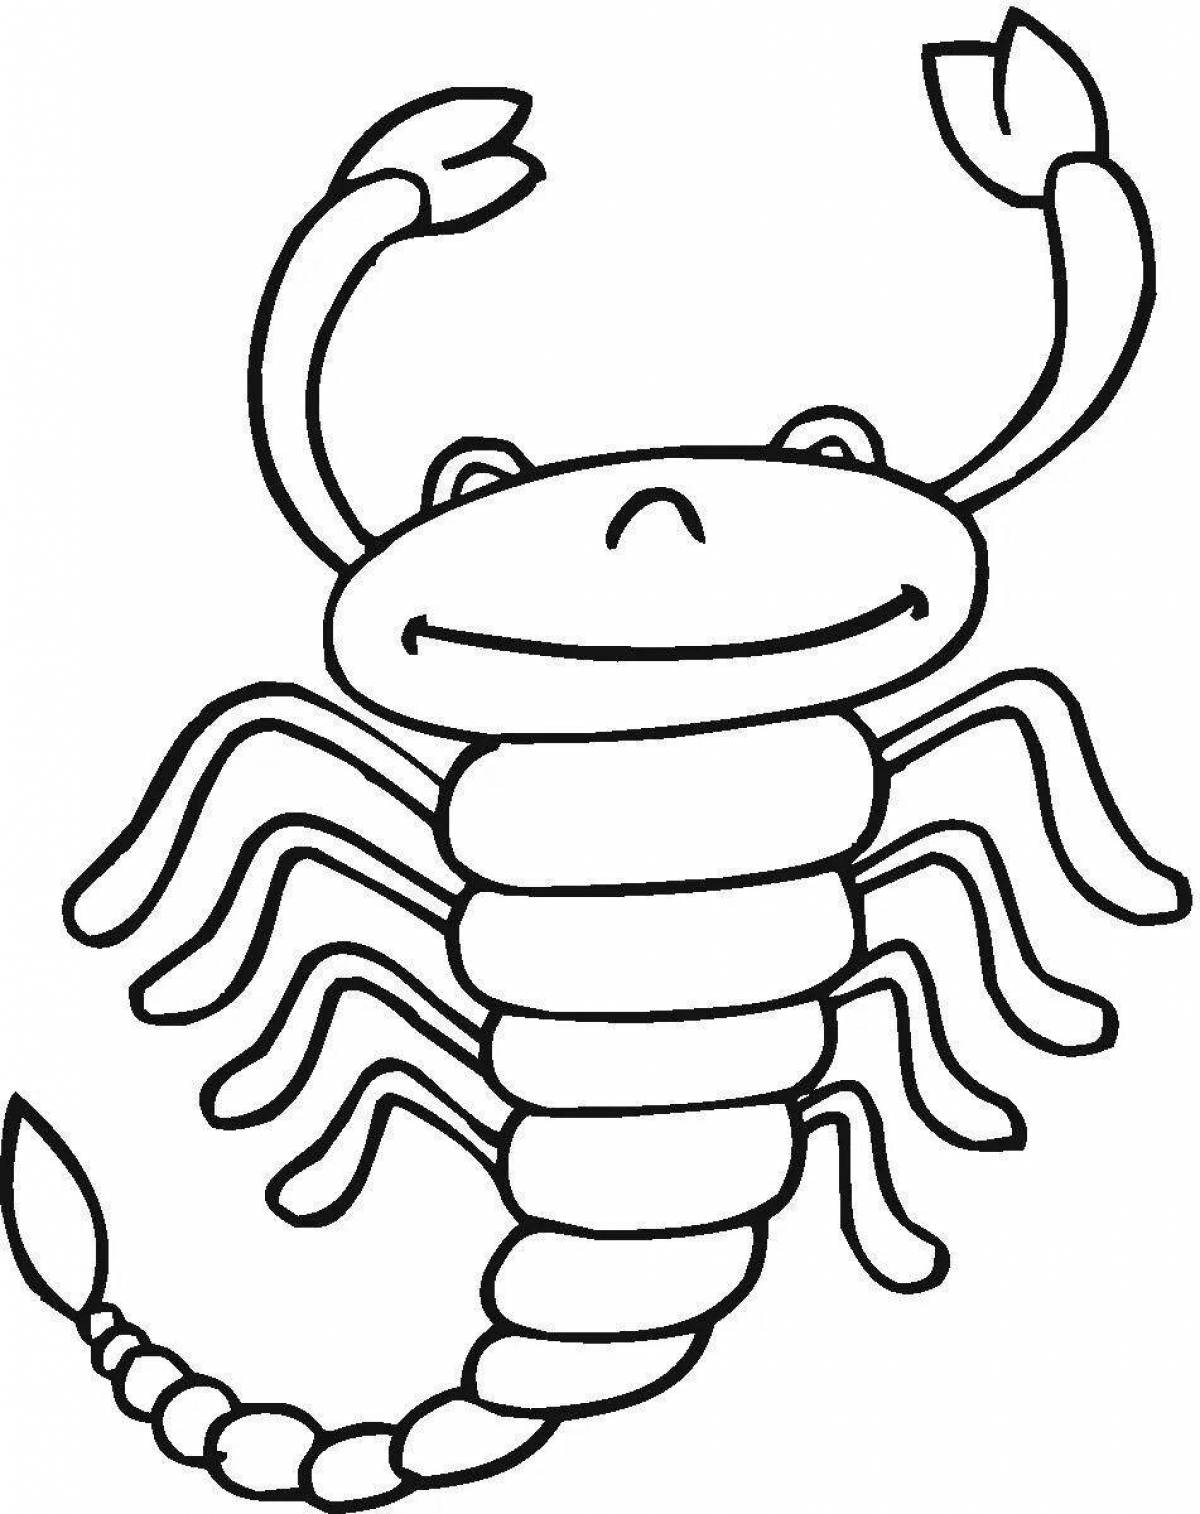 Coloring page playful scorpion